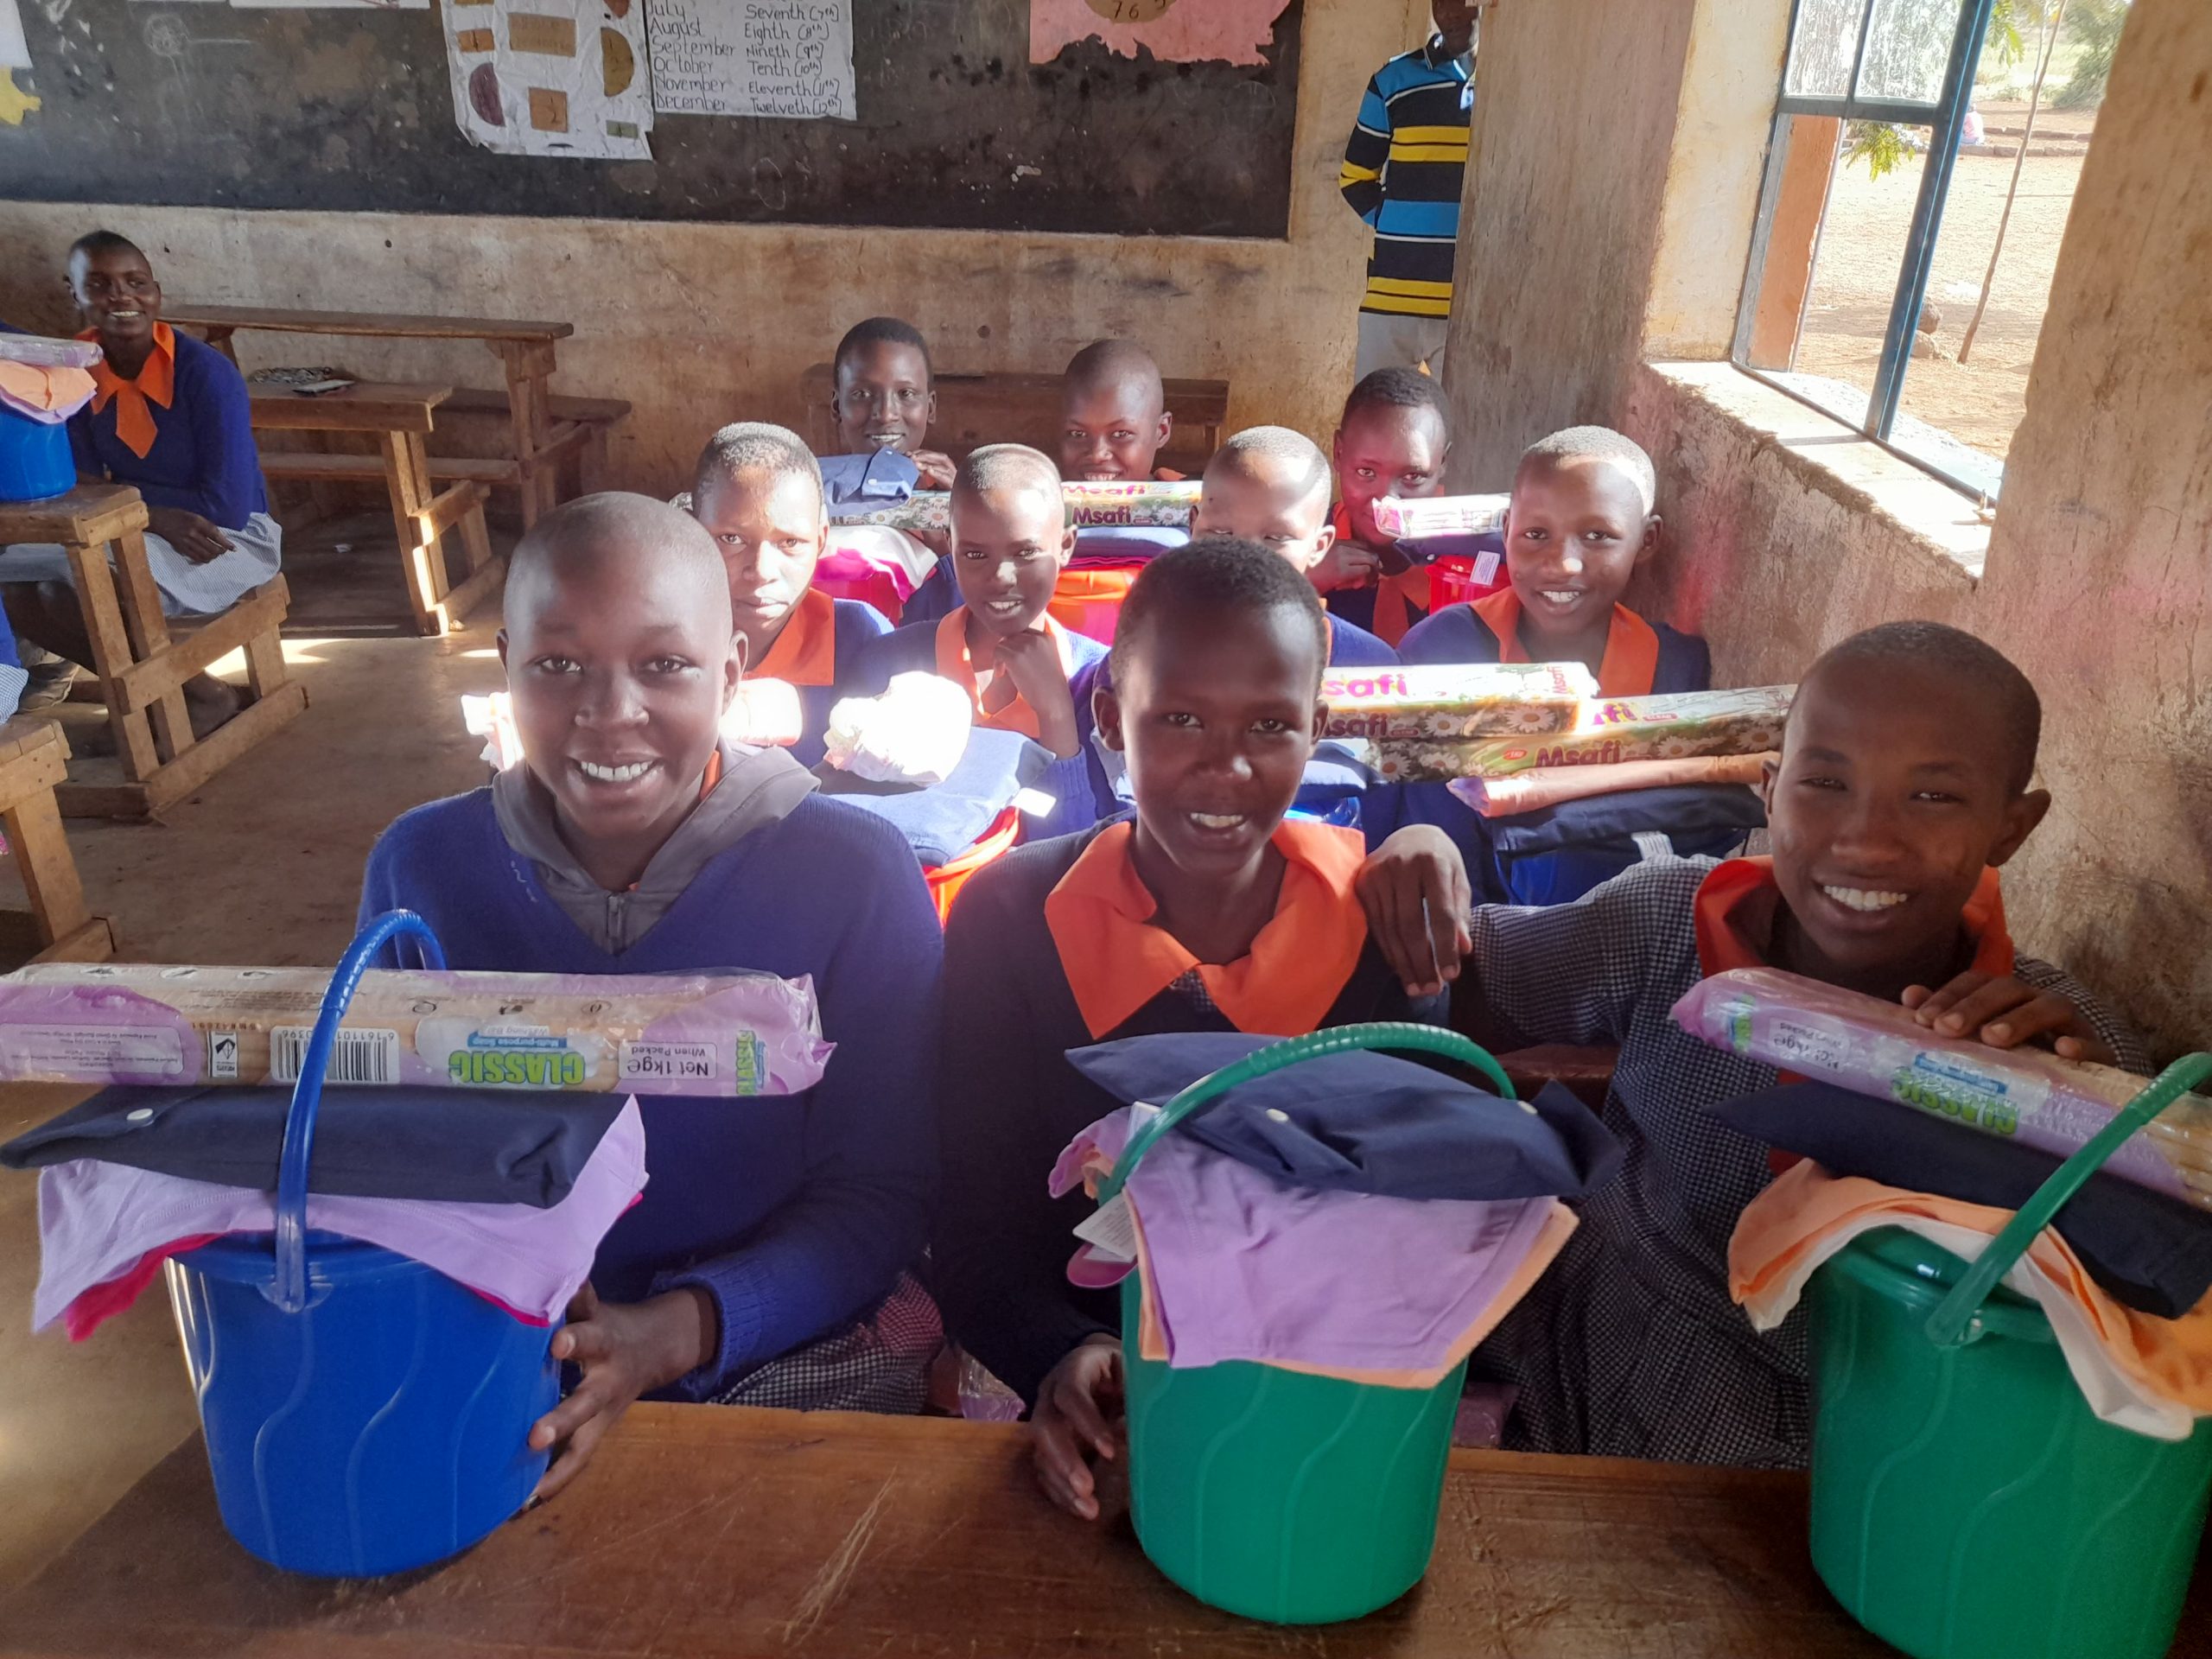 A school class in Kenya engaging in conservation, with gifts and items such as sanitary pads.